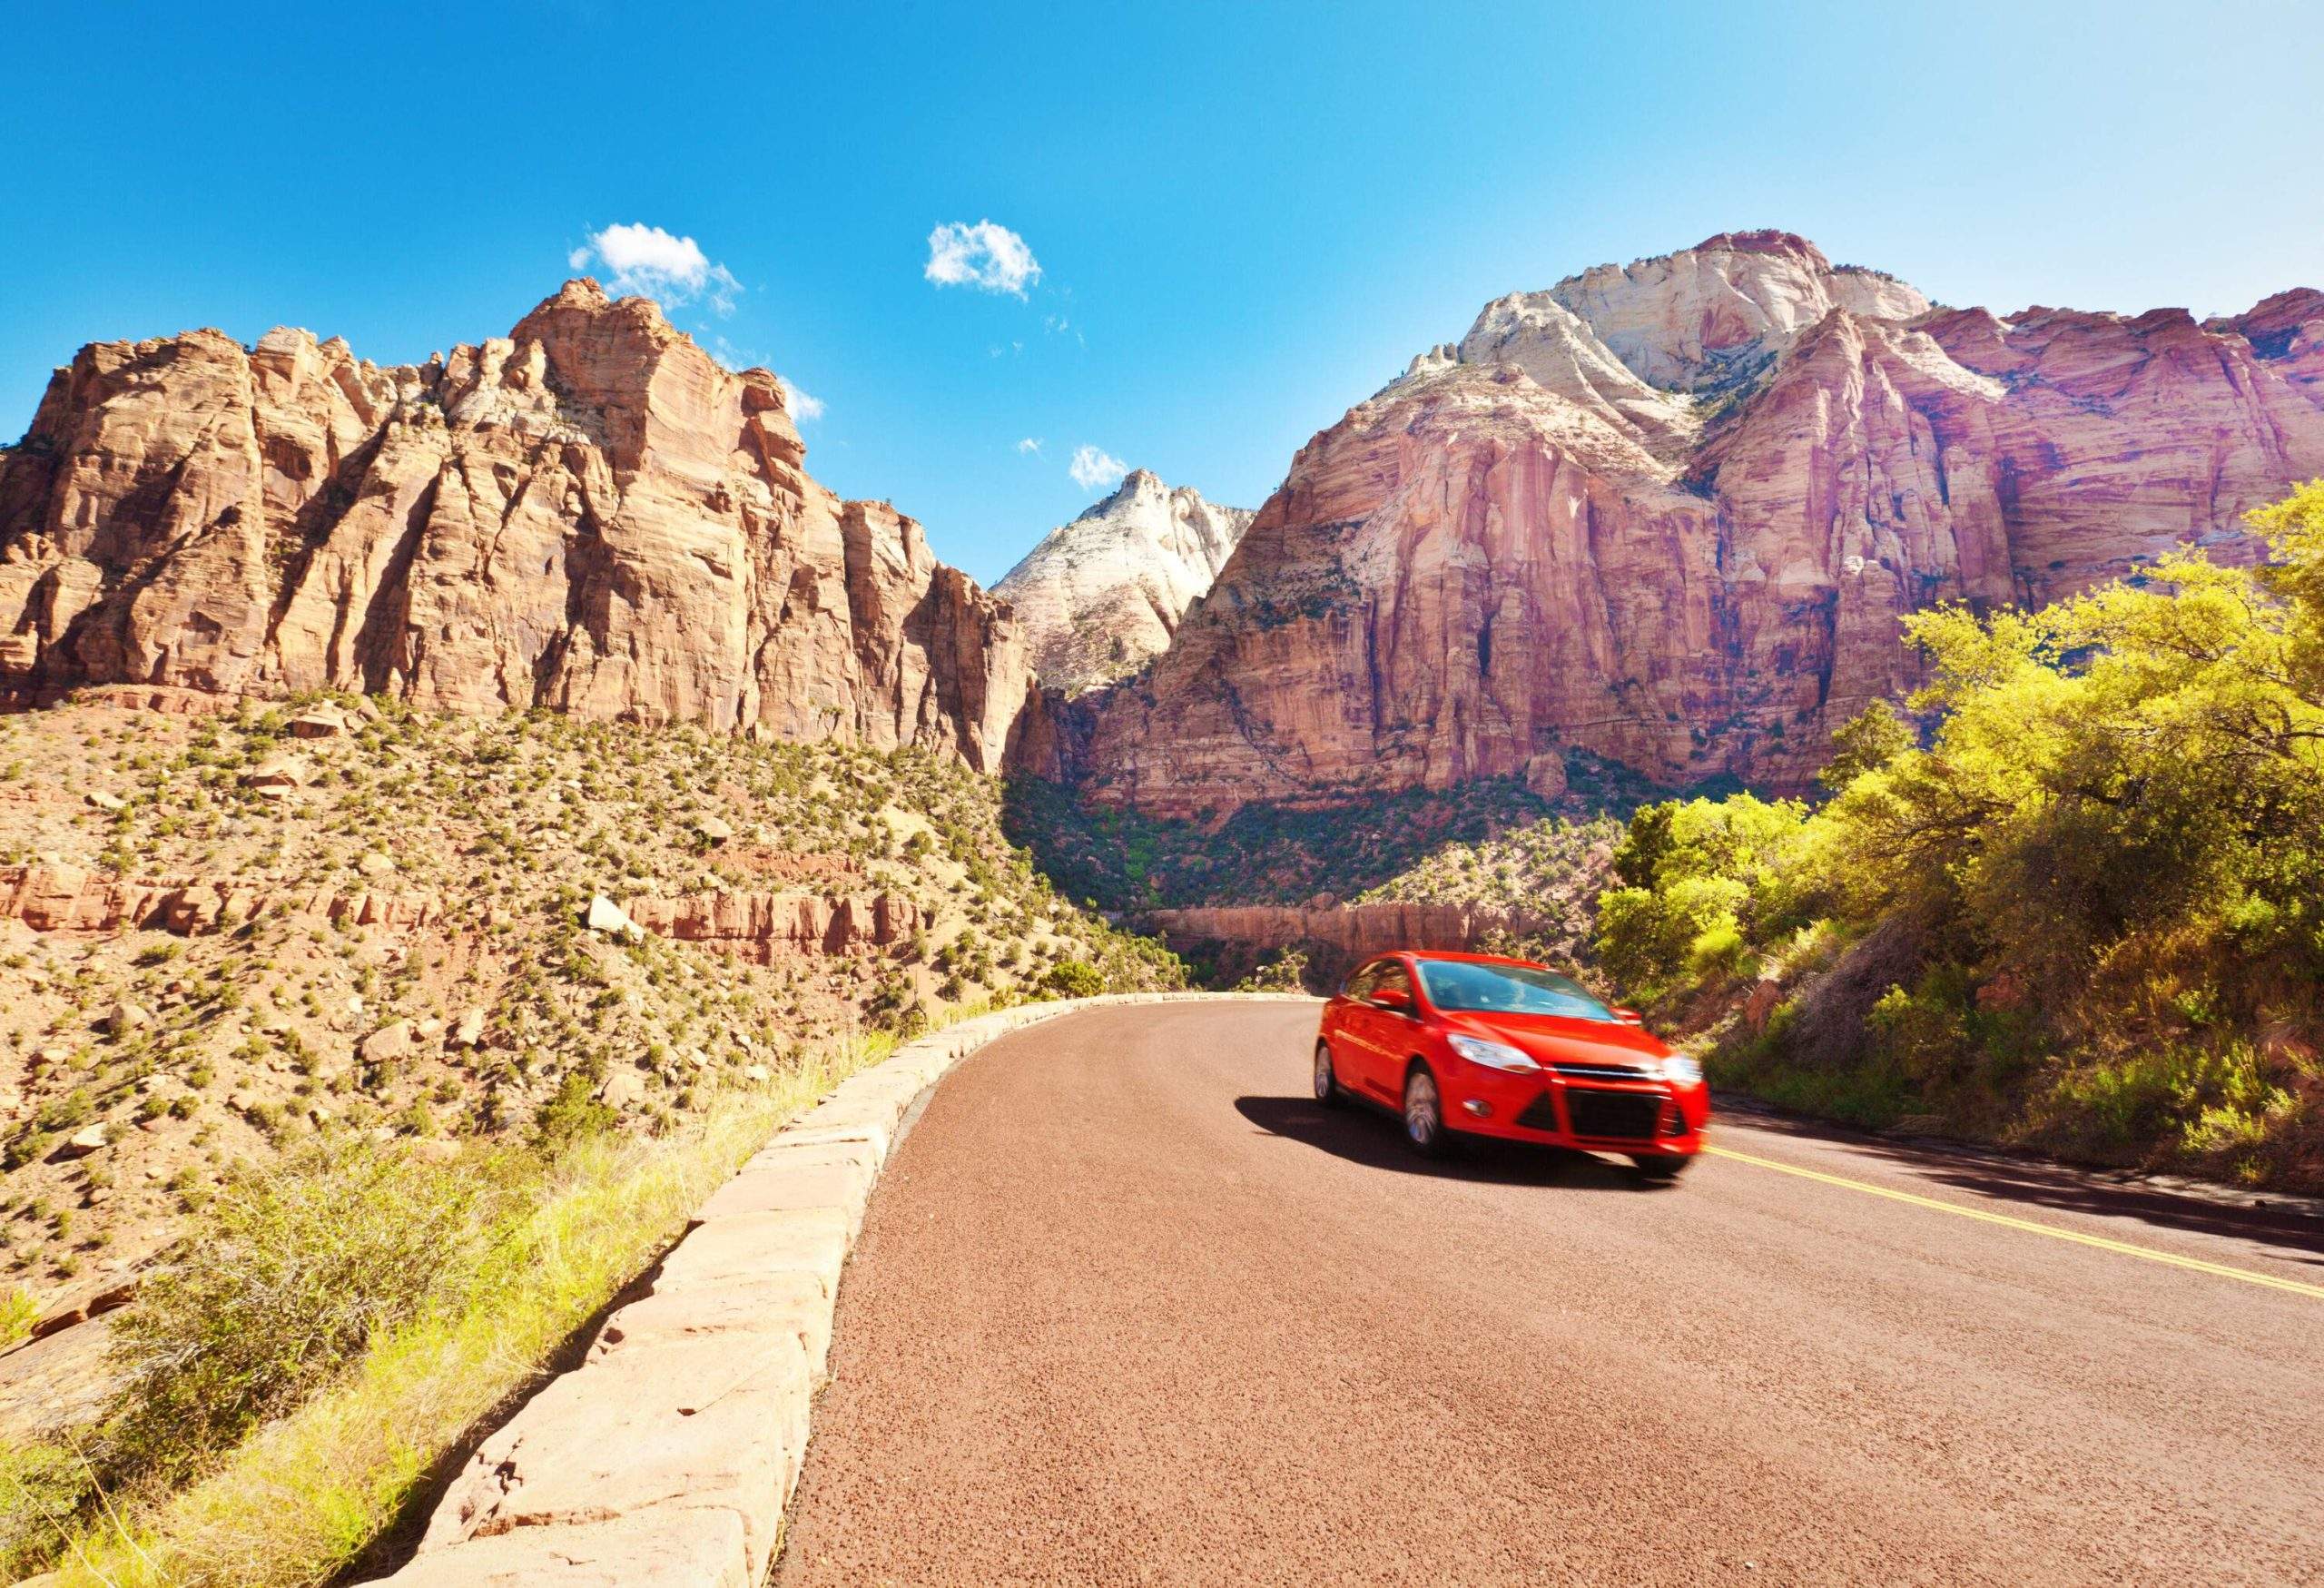 A vibrant red car cruises along the winding mountain highways, embracing the scenic beauty of the majestic peaks and panoramic vistas that surround it.